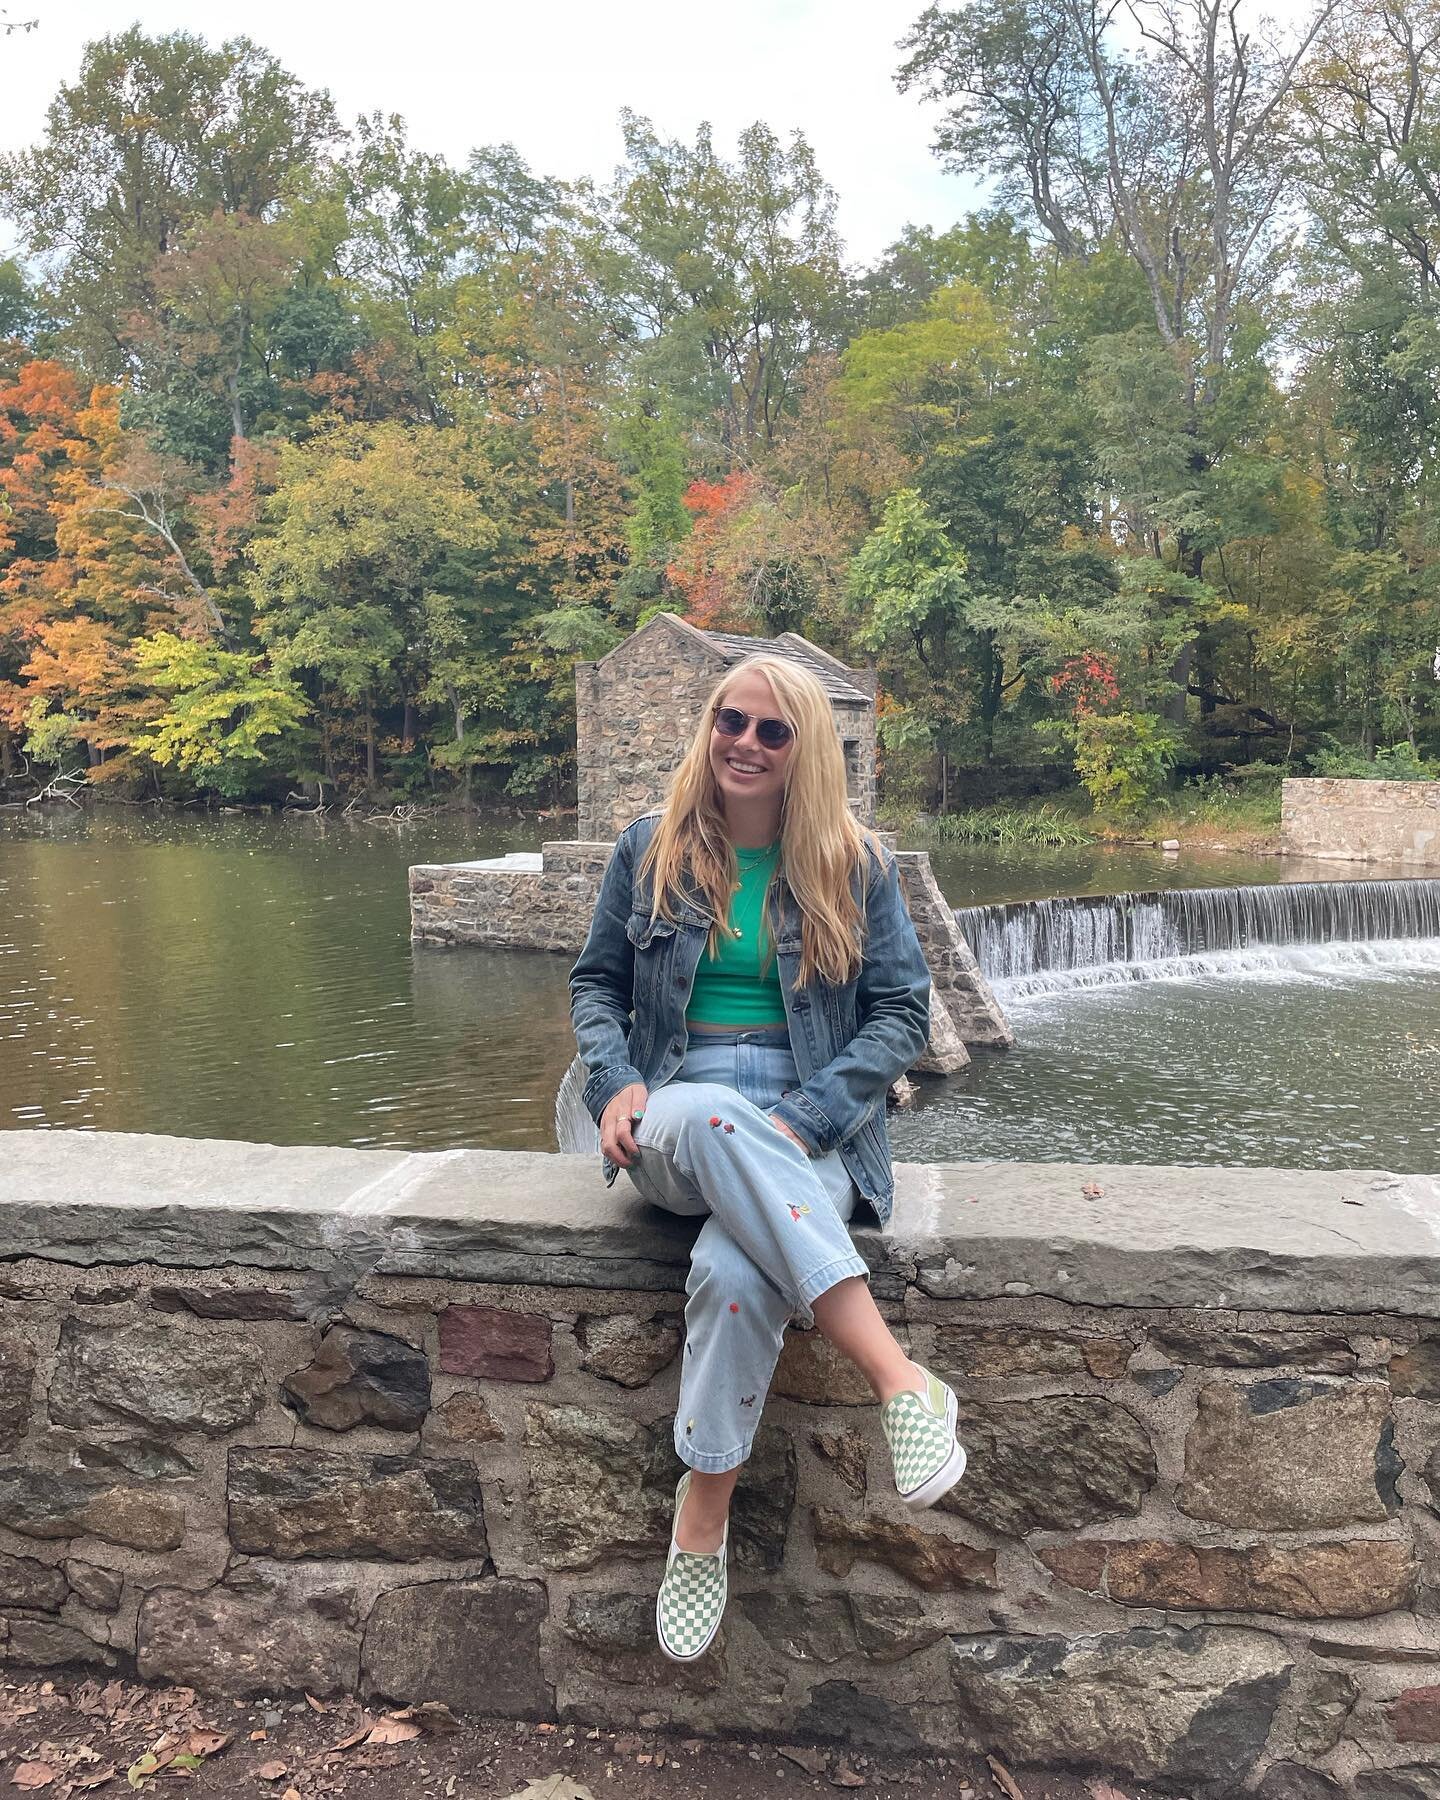 Me to @farandapanda: take my picture this looks cute

What actually happens: 1 cute photo and&hellip;this

#fall #foliage #morrisplains #amicute #istillhatefall #imisssummer